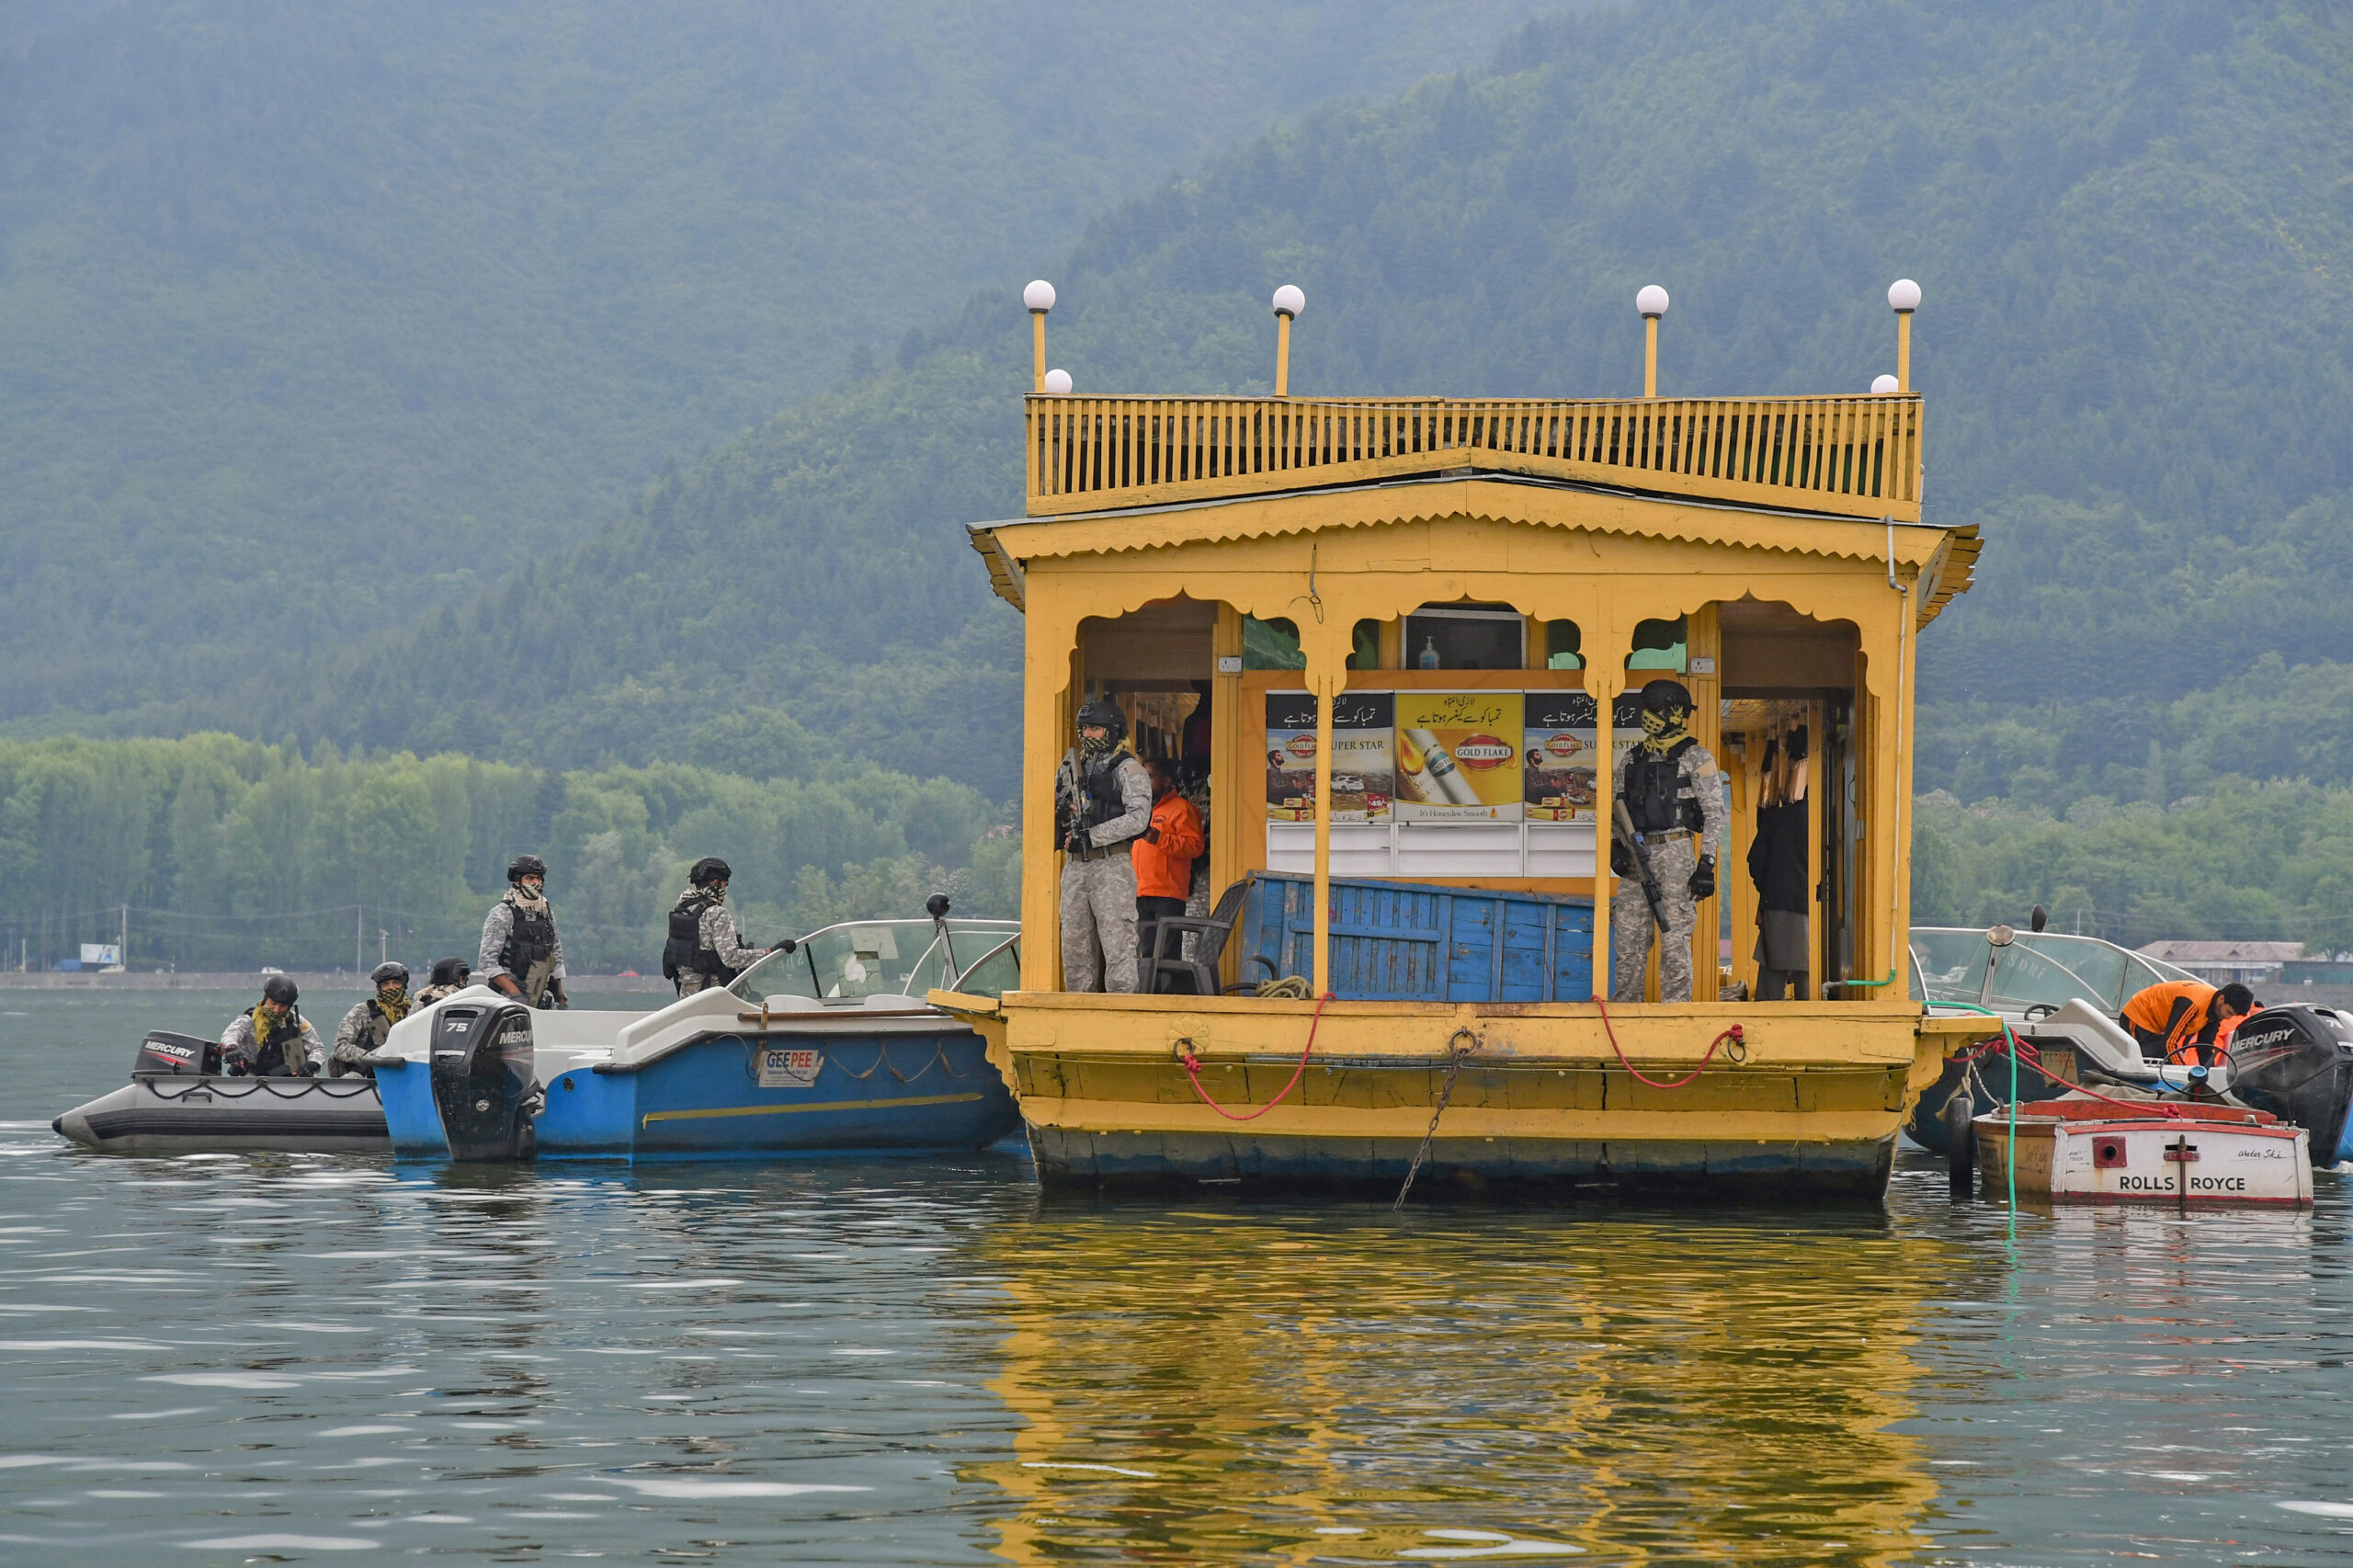 Indian Navy Marine Commandos (MARCOS) patrol in the Dal Lake ahead of the G20 meeting